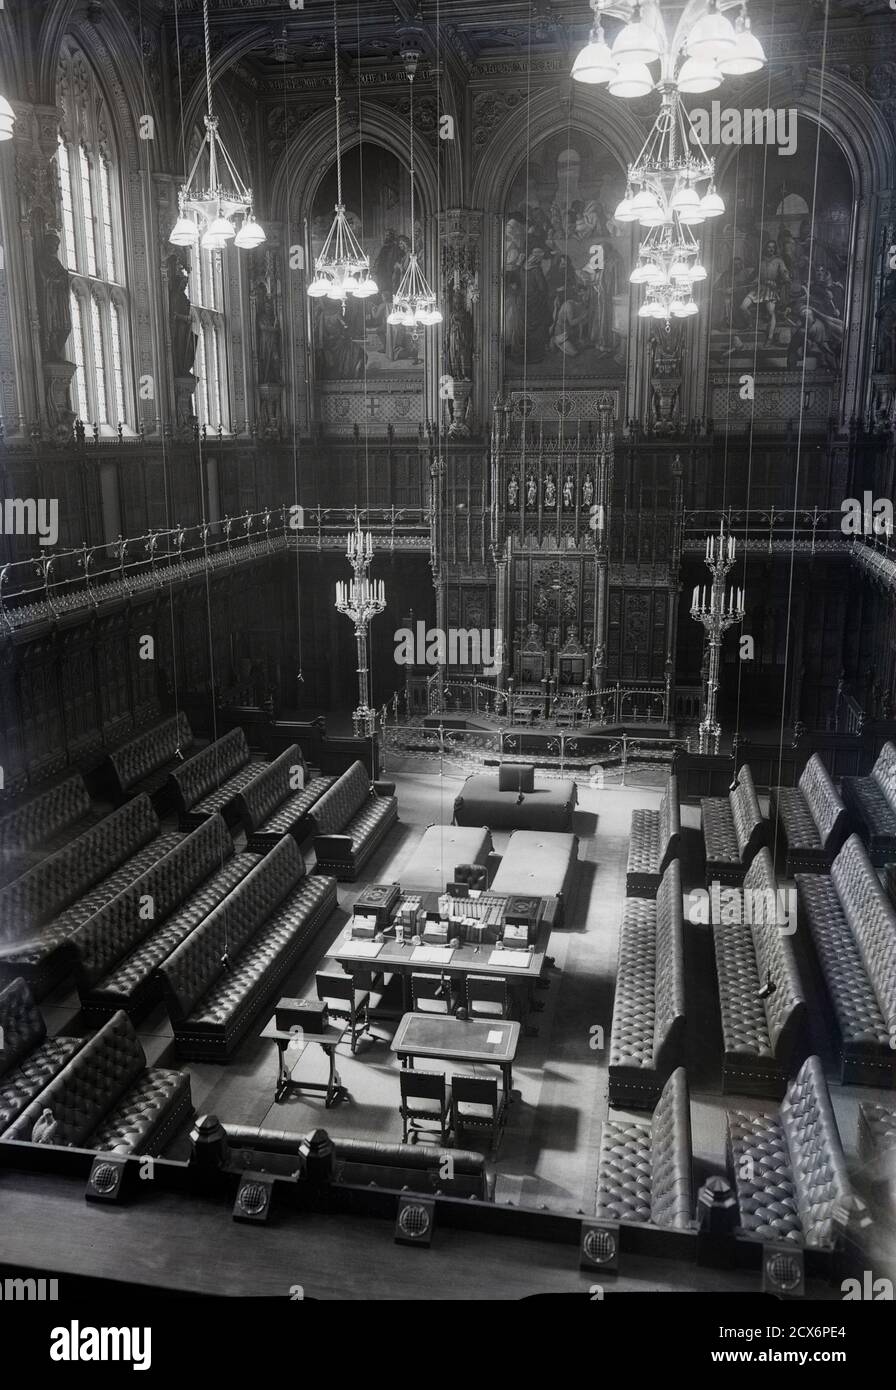 LONDON: The interior of the House of Lords in the Houses of Parliament, London in c1950. The Houses of Parliament suffered extensive damage following German bombing raids on 10th-11th May 1941 during World War II and both chambers finally re-opened for parliamentary business in October 1950. Stock Photo